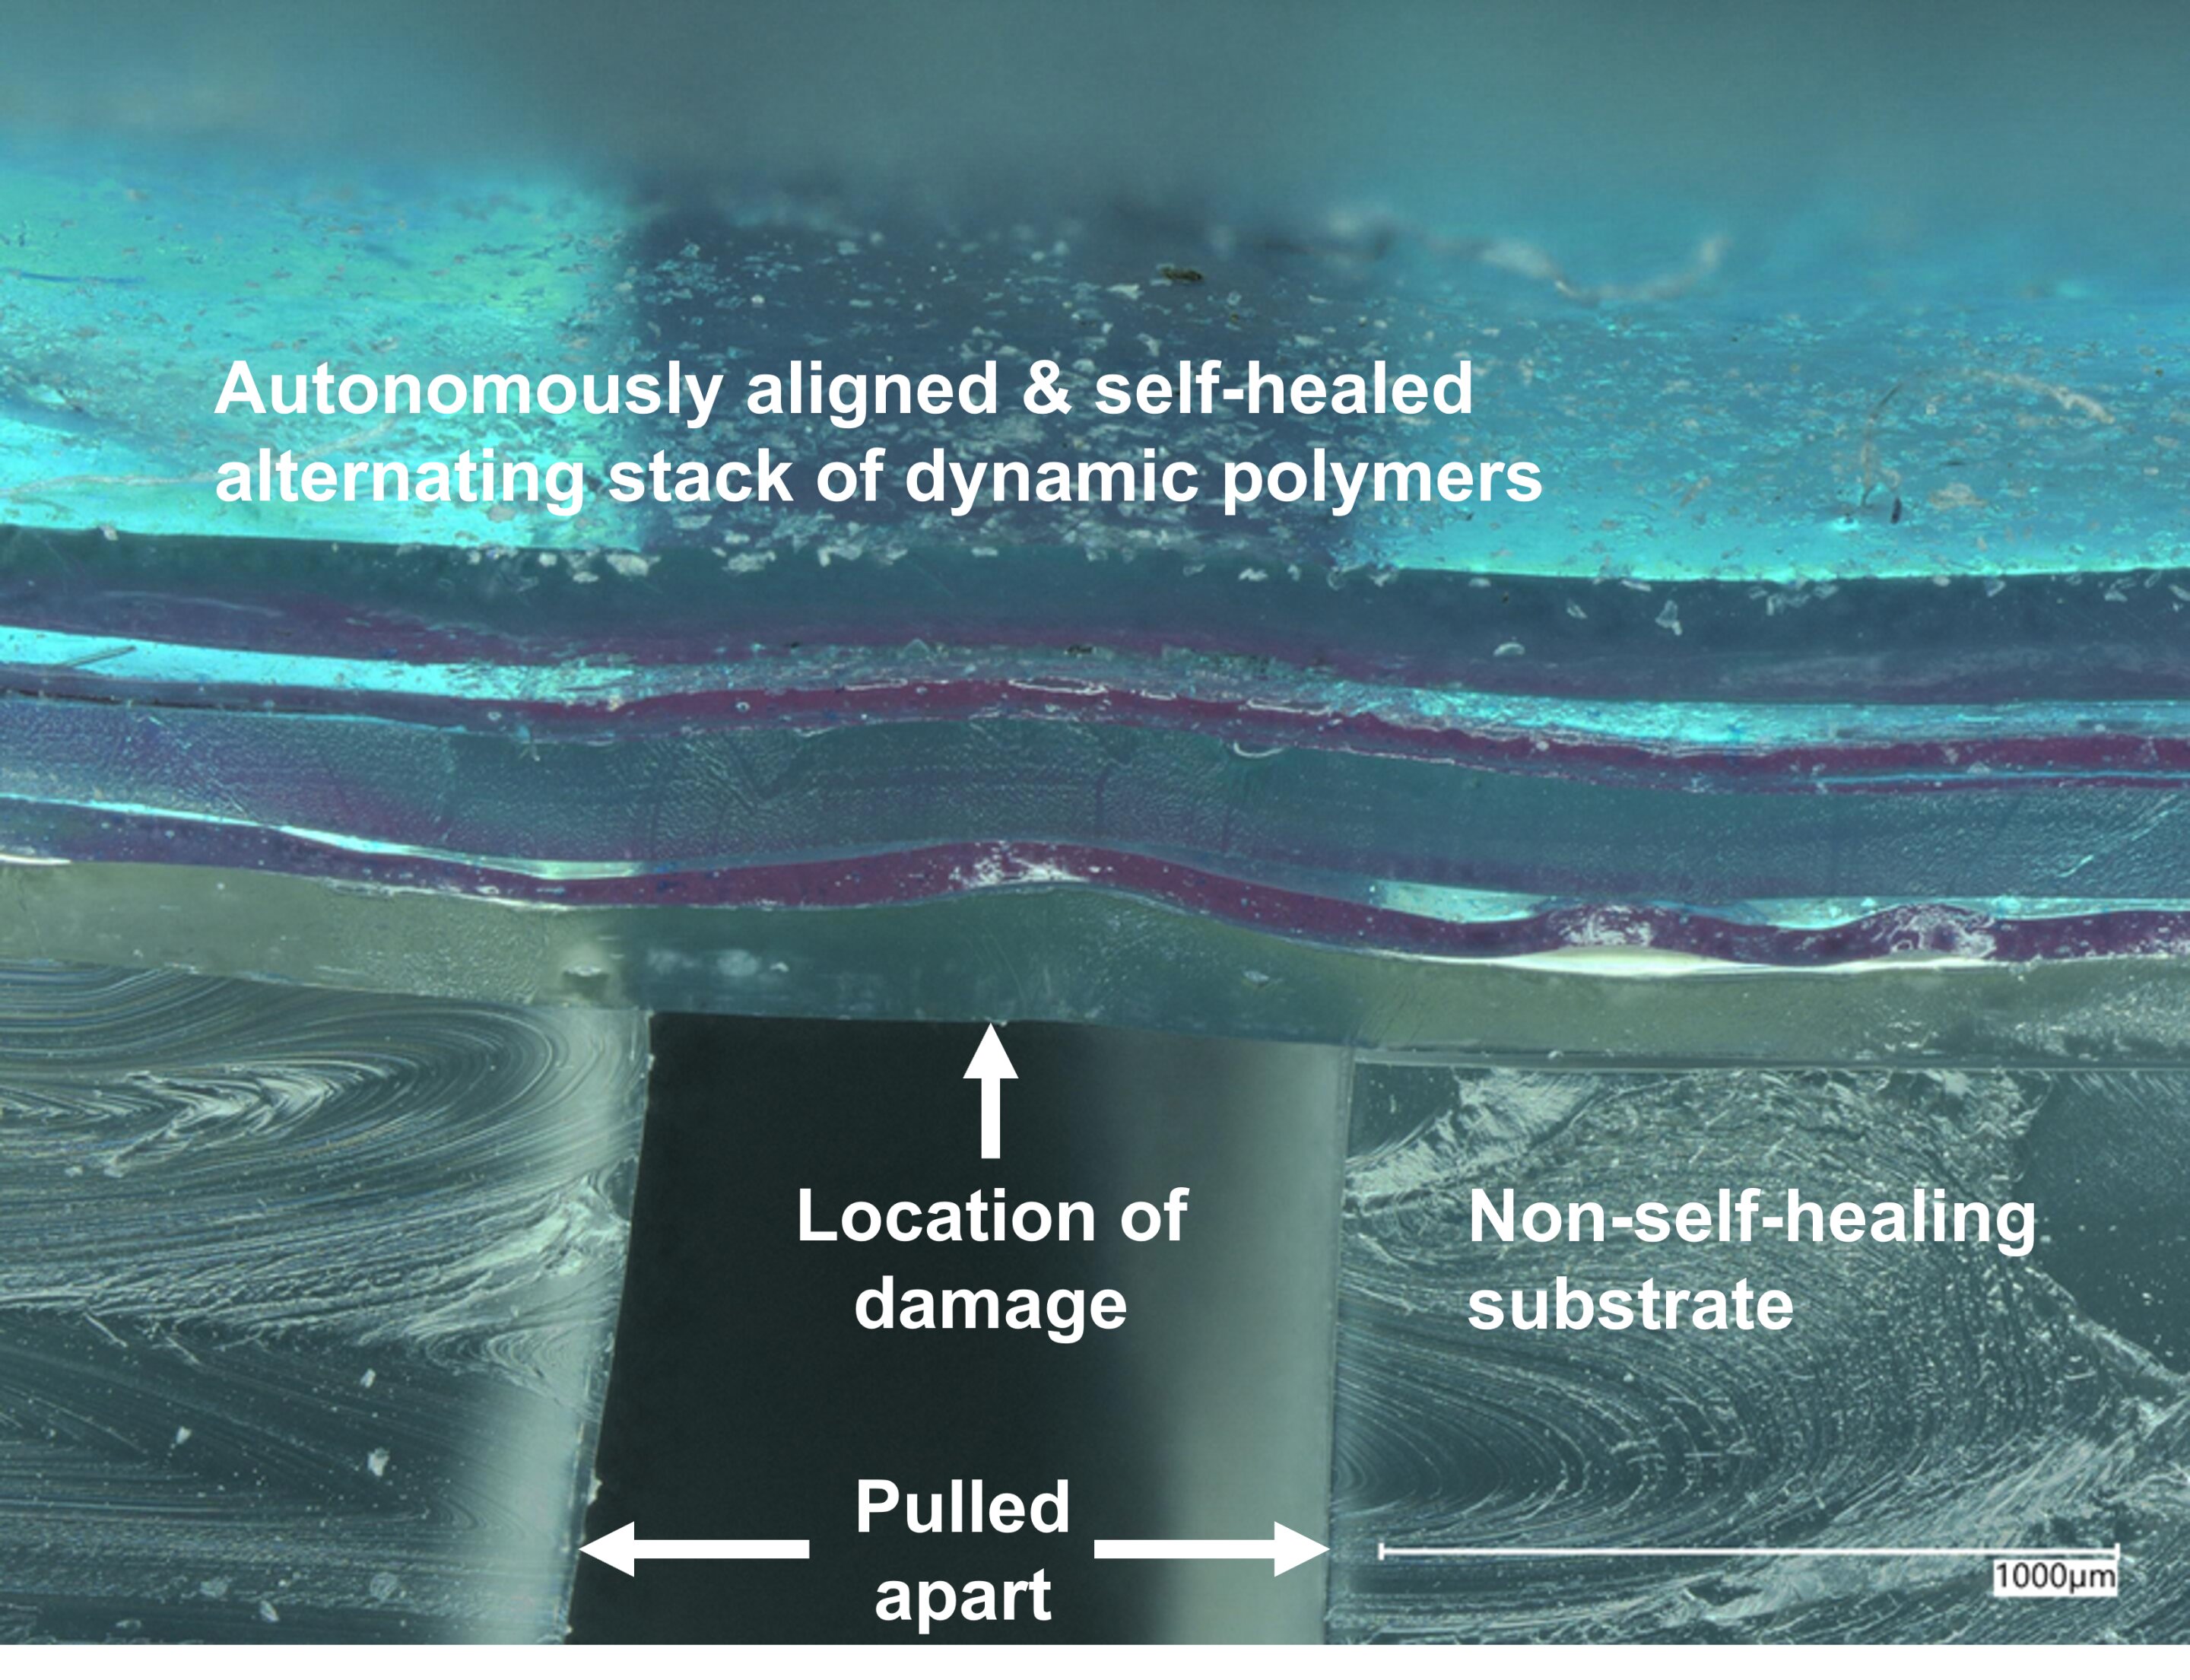 Layers of self-healing electronic skin realign autonomously when cut